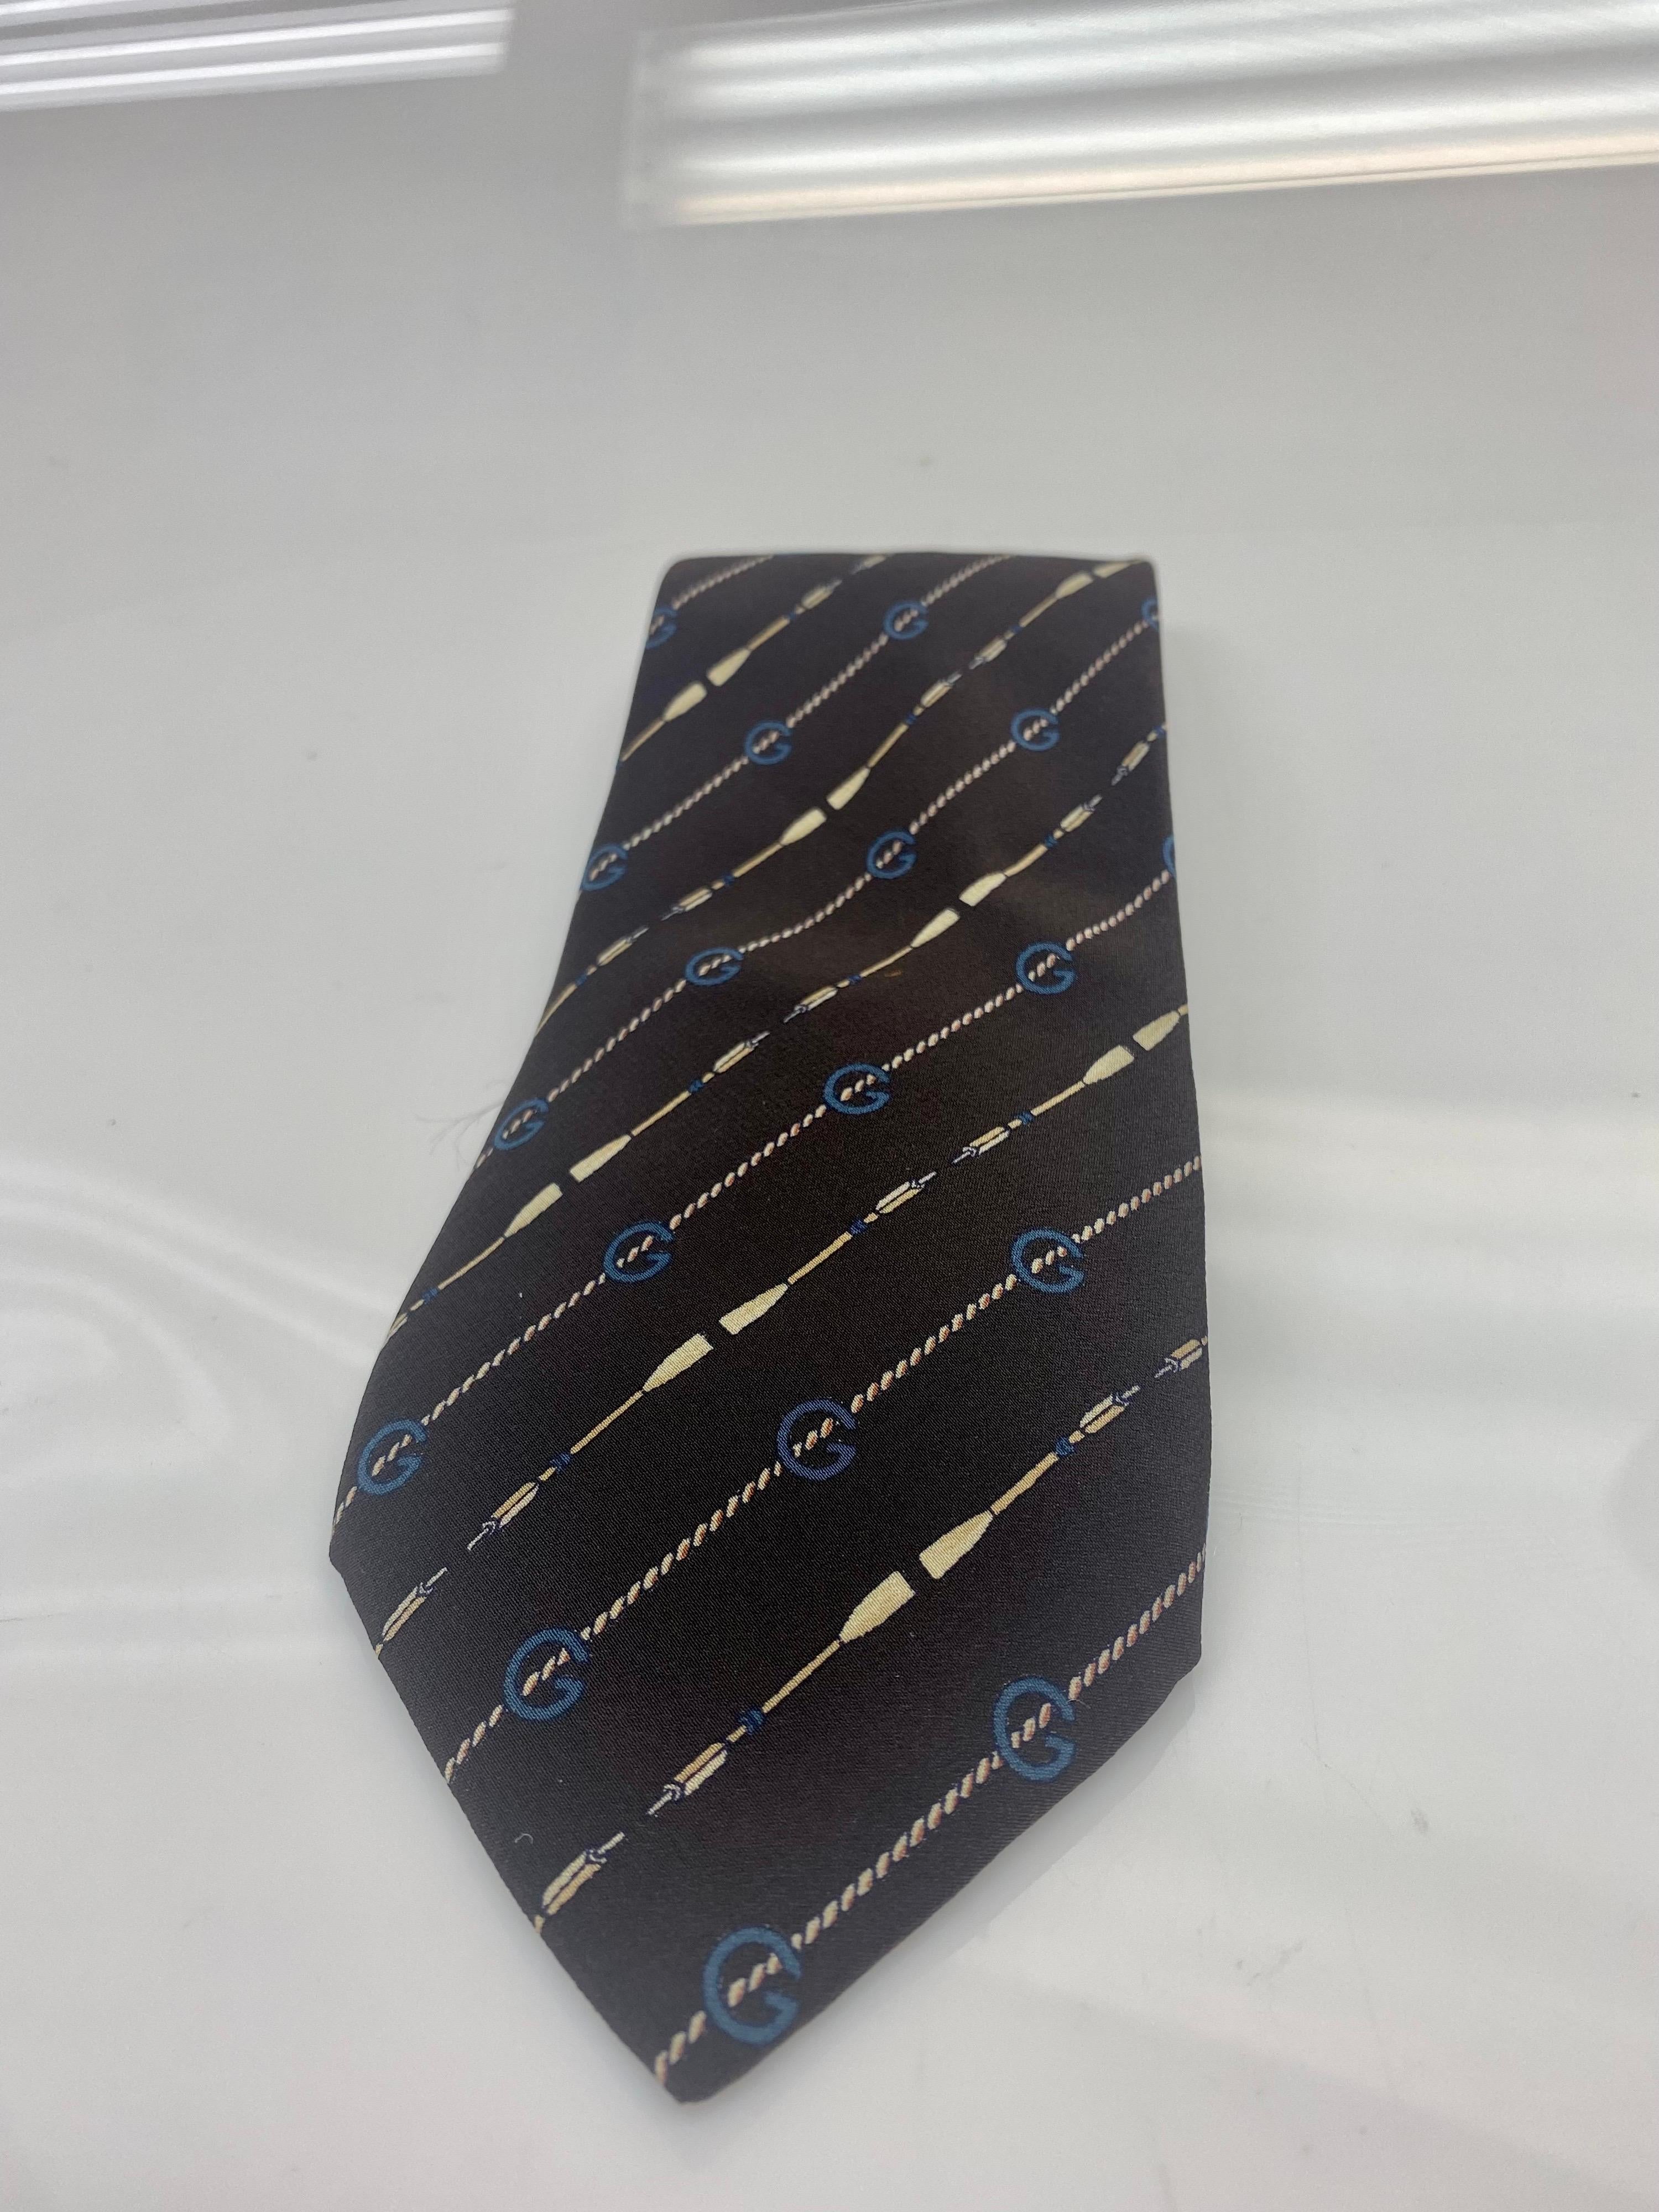 Gucci vintage silk chocolate brown GG monogram and blue G detailing 
Sophisticated and classic piece and a perfect addition to any wardrobe. Item is in good condition, wear consistent with age. Some threading in the back of the tie and Gucci tag